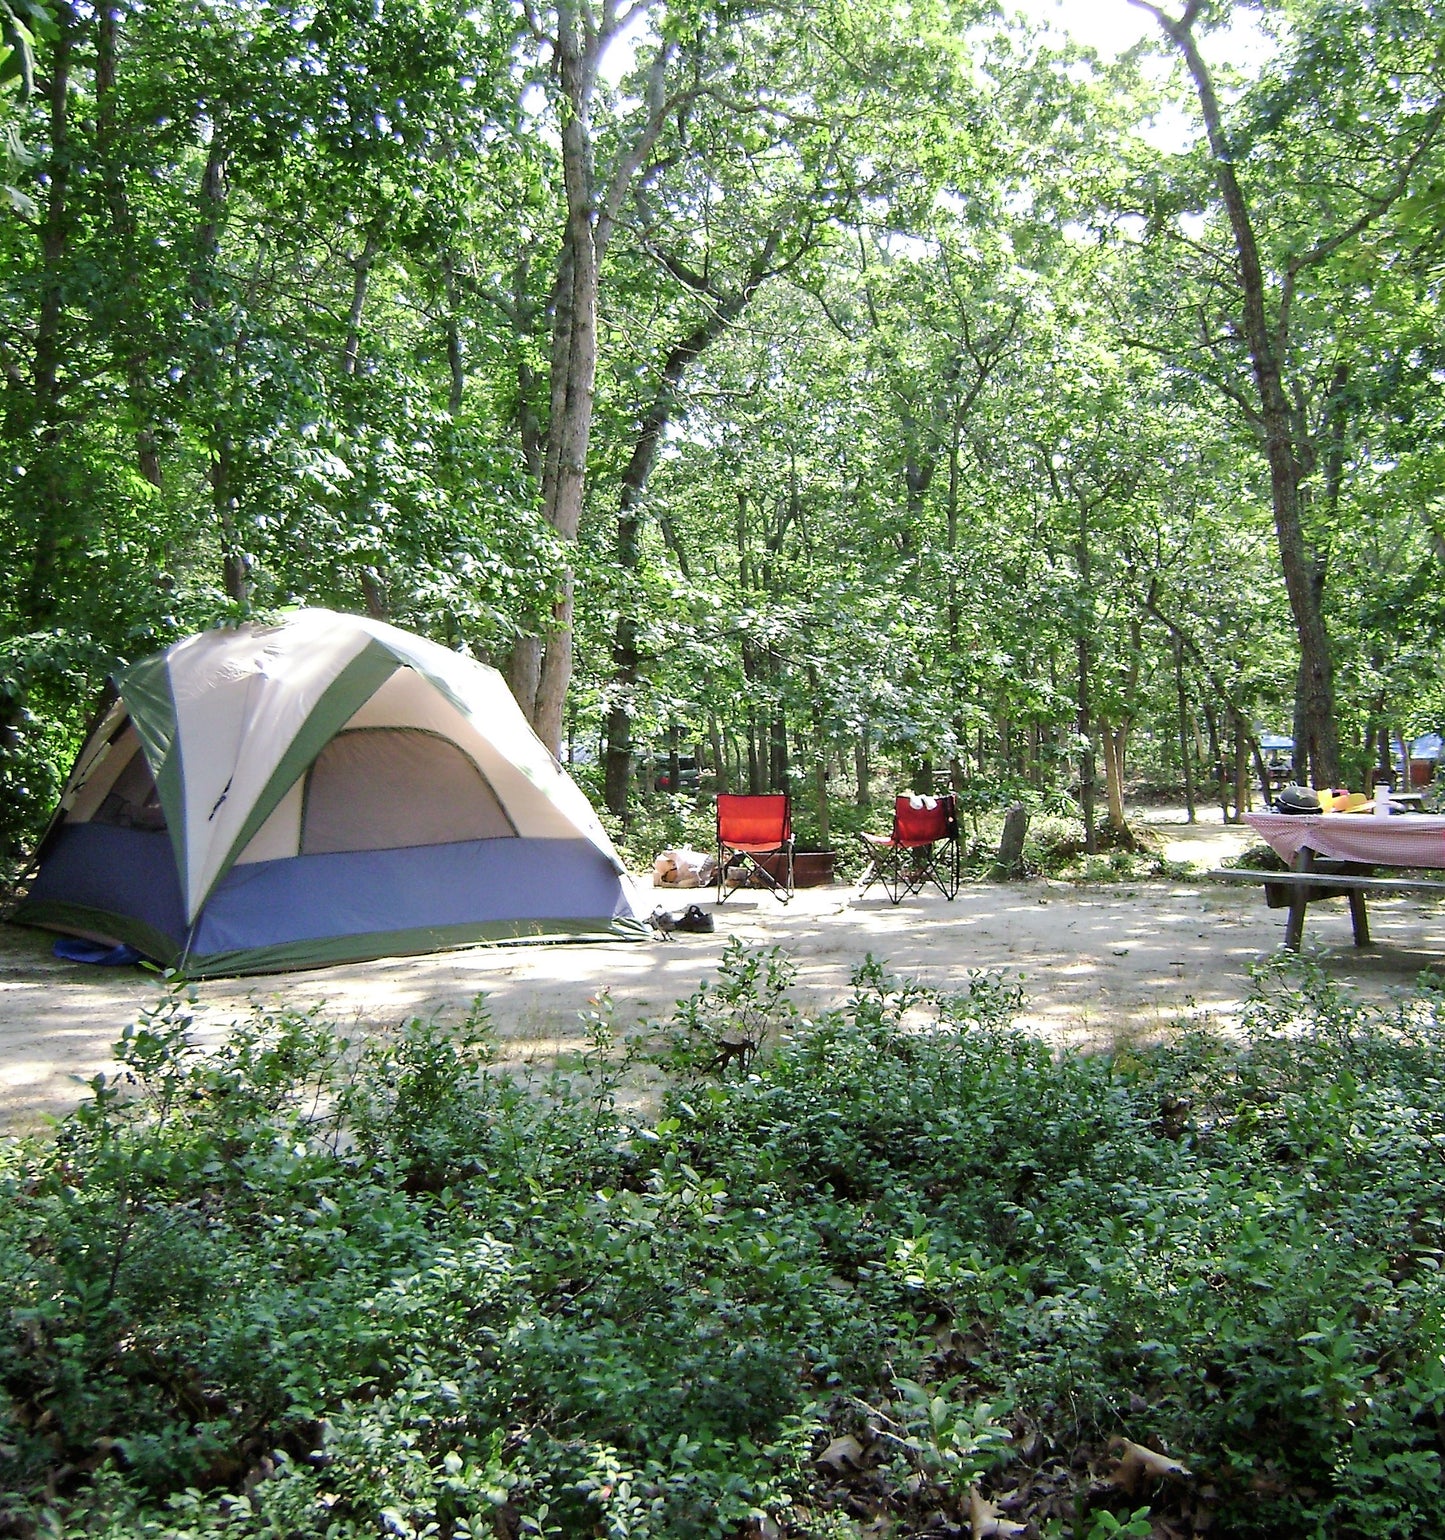 Campsite Check-in/Check-out Information